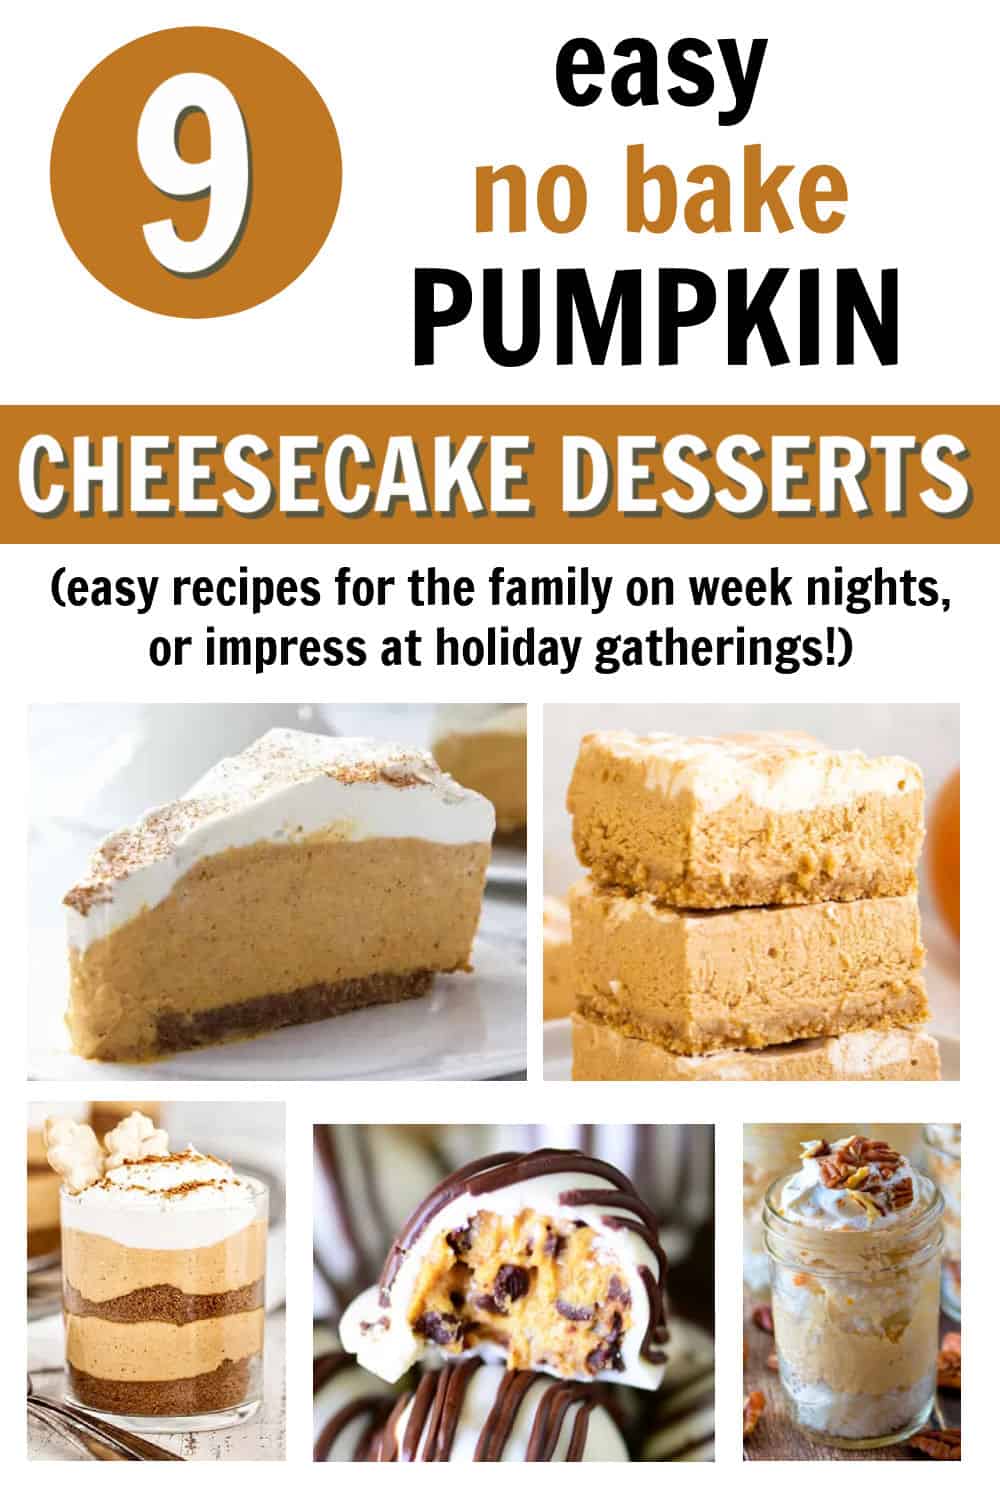 5 different pumpkin cheesecake dessert images with text overlay 9 easy no bake pumpkin cheesecake desserts - easy recipes for the family on week nights, or impress at holiday gatherings!